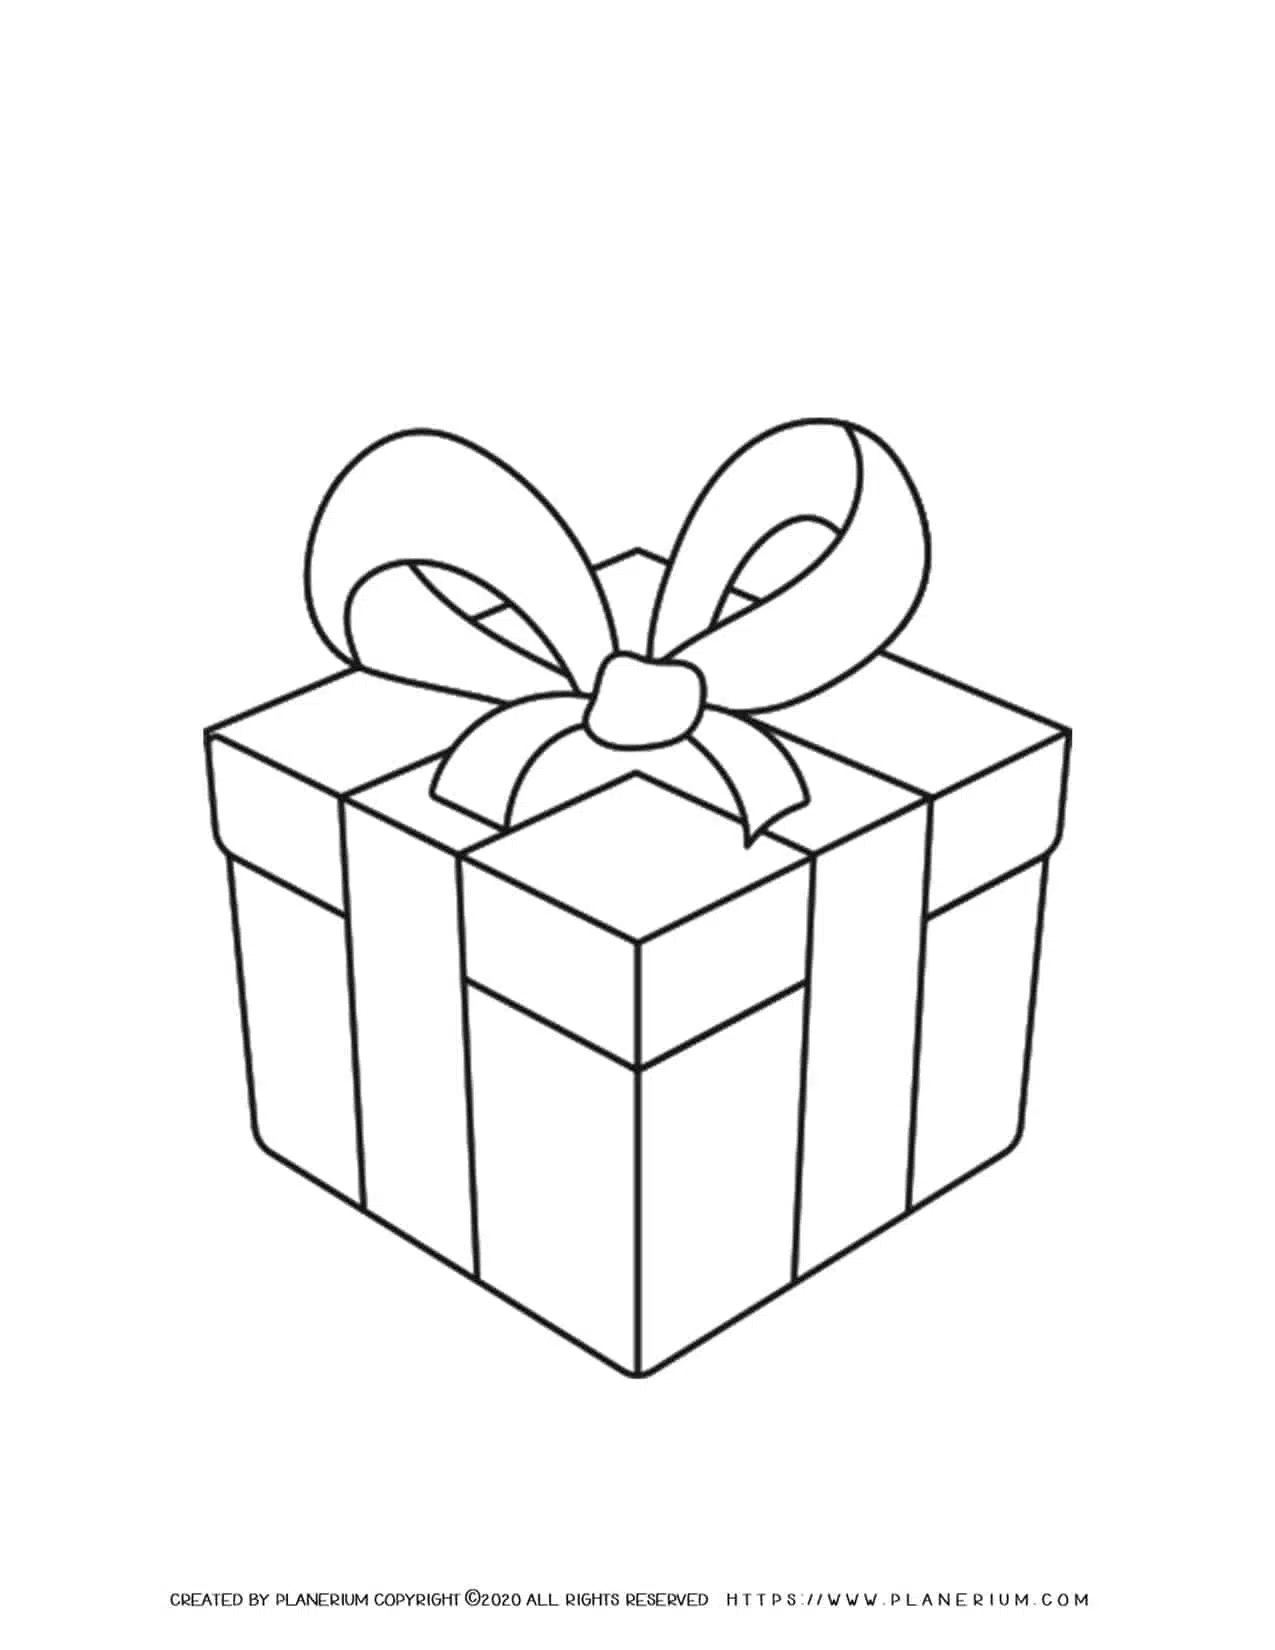 Birthday presents - Coloring Pages for kids